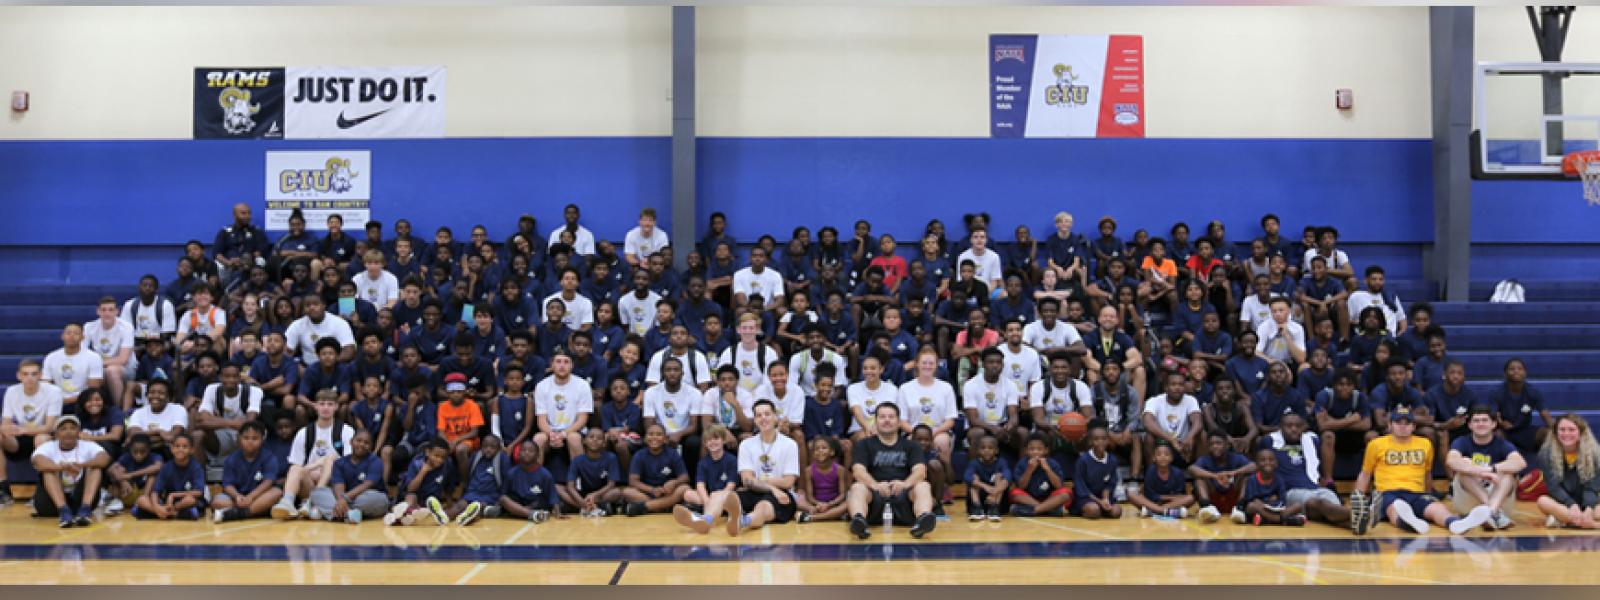 The CIU Rams hold the Hope for Hope basketball camp with local youth.